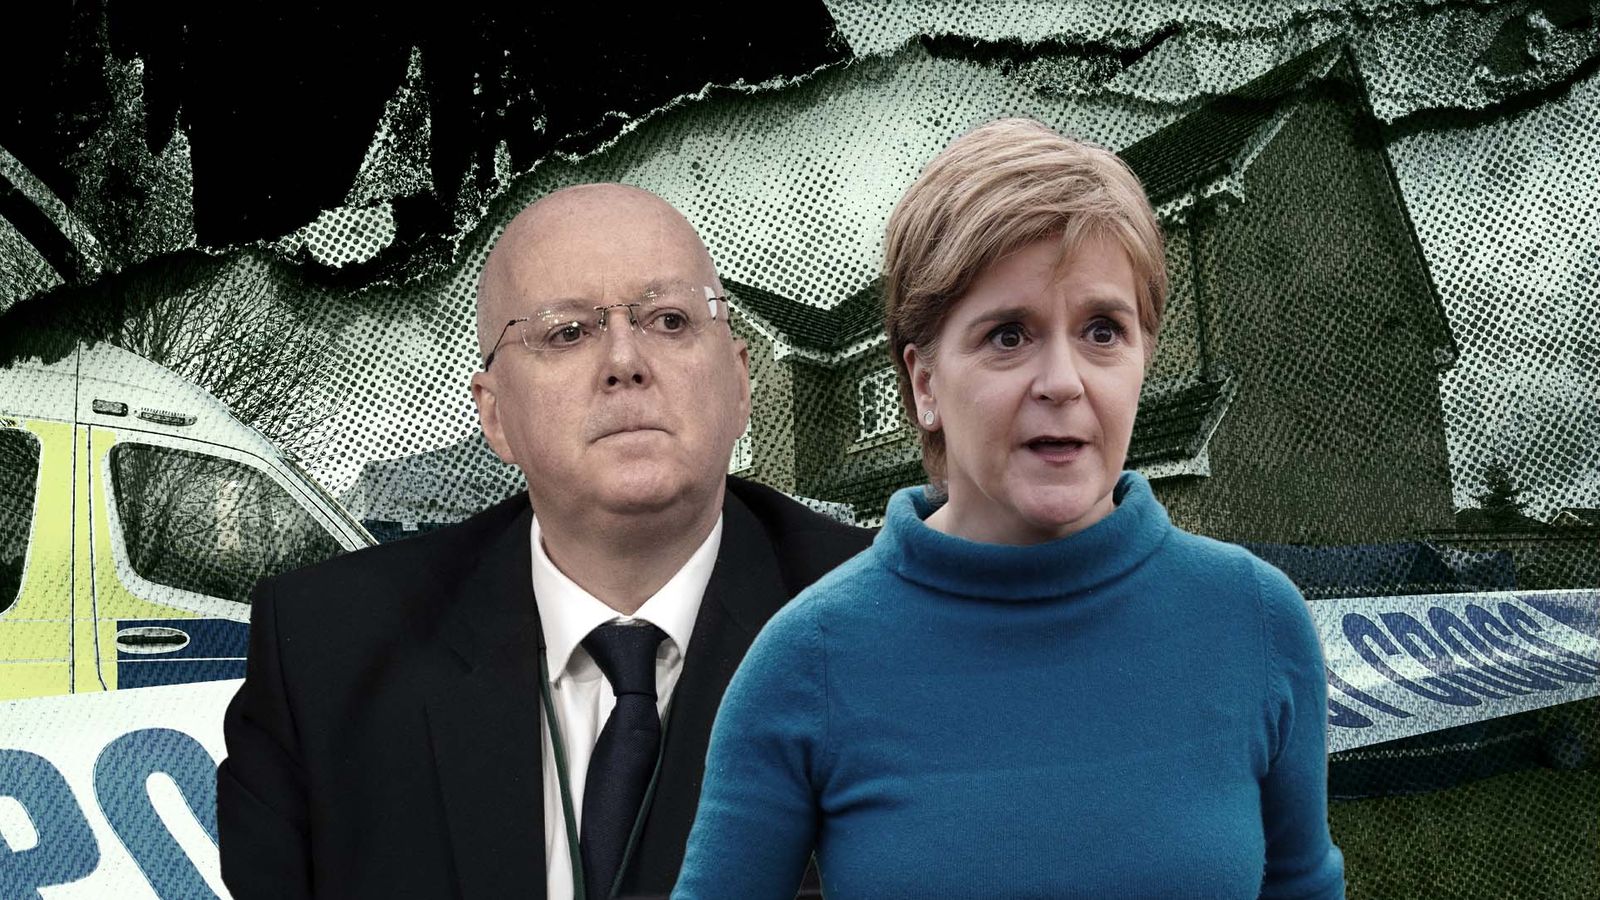 Arrests, a luxury motorhome and a power couple's fall: The inside story of SNP police probe